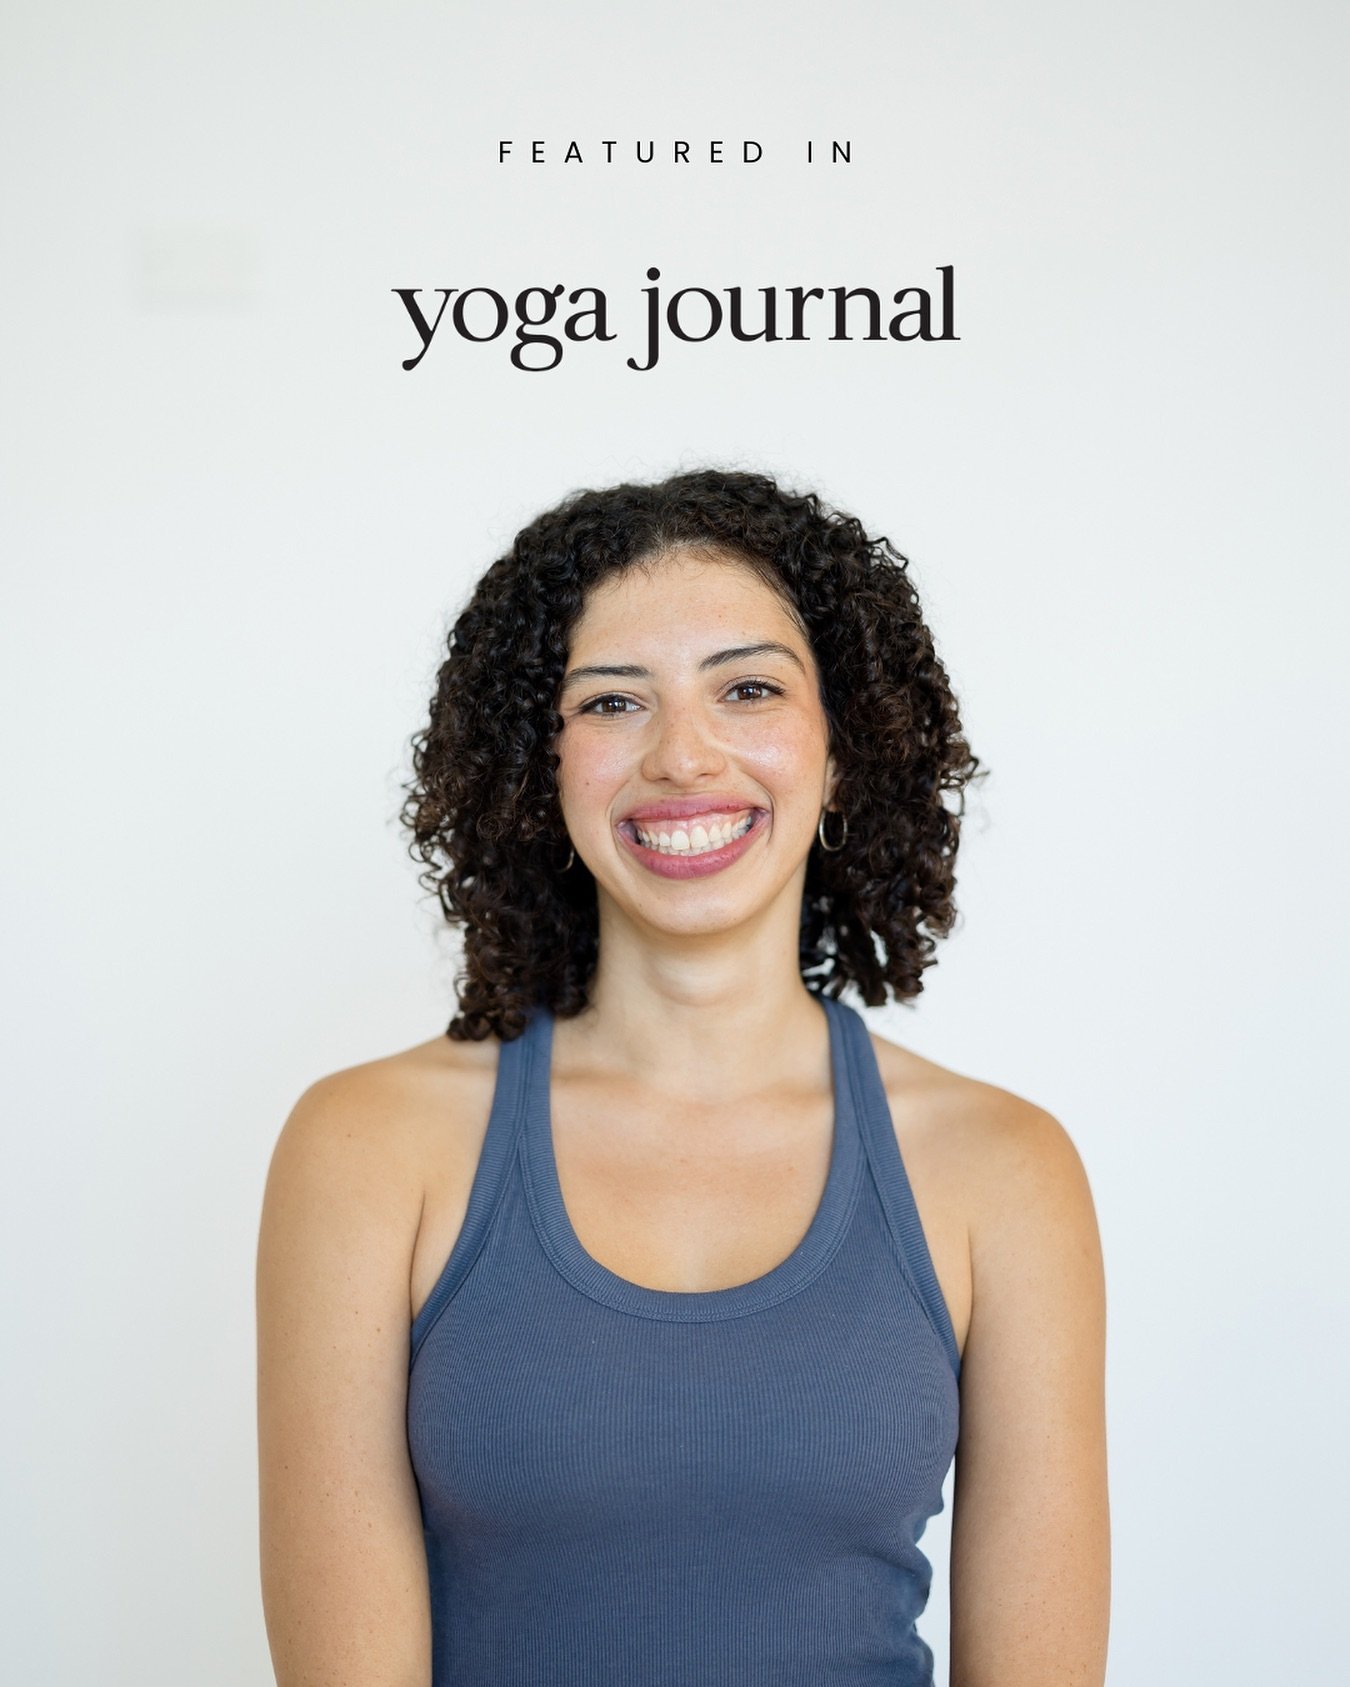 Excited to share that this week I was featured in @yogajournal ✨

Which in the yoga world, is a pretty big deal!!! 

What&rsquo;s even cooler is that one of my dearest pals @thealiplante was quoted in the same article, and we didn&rsquo;t even know i